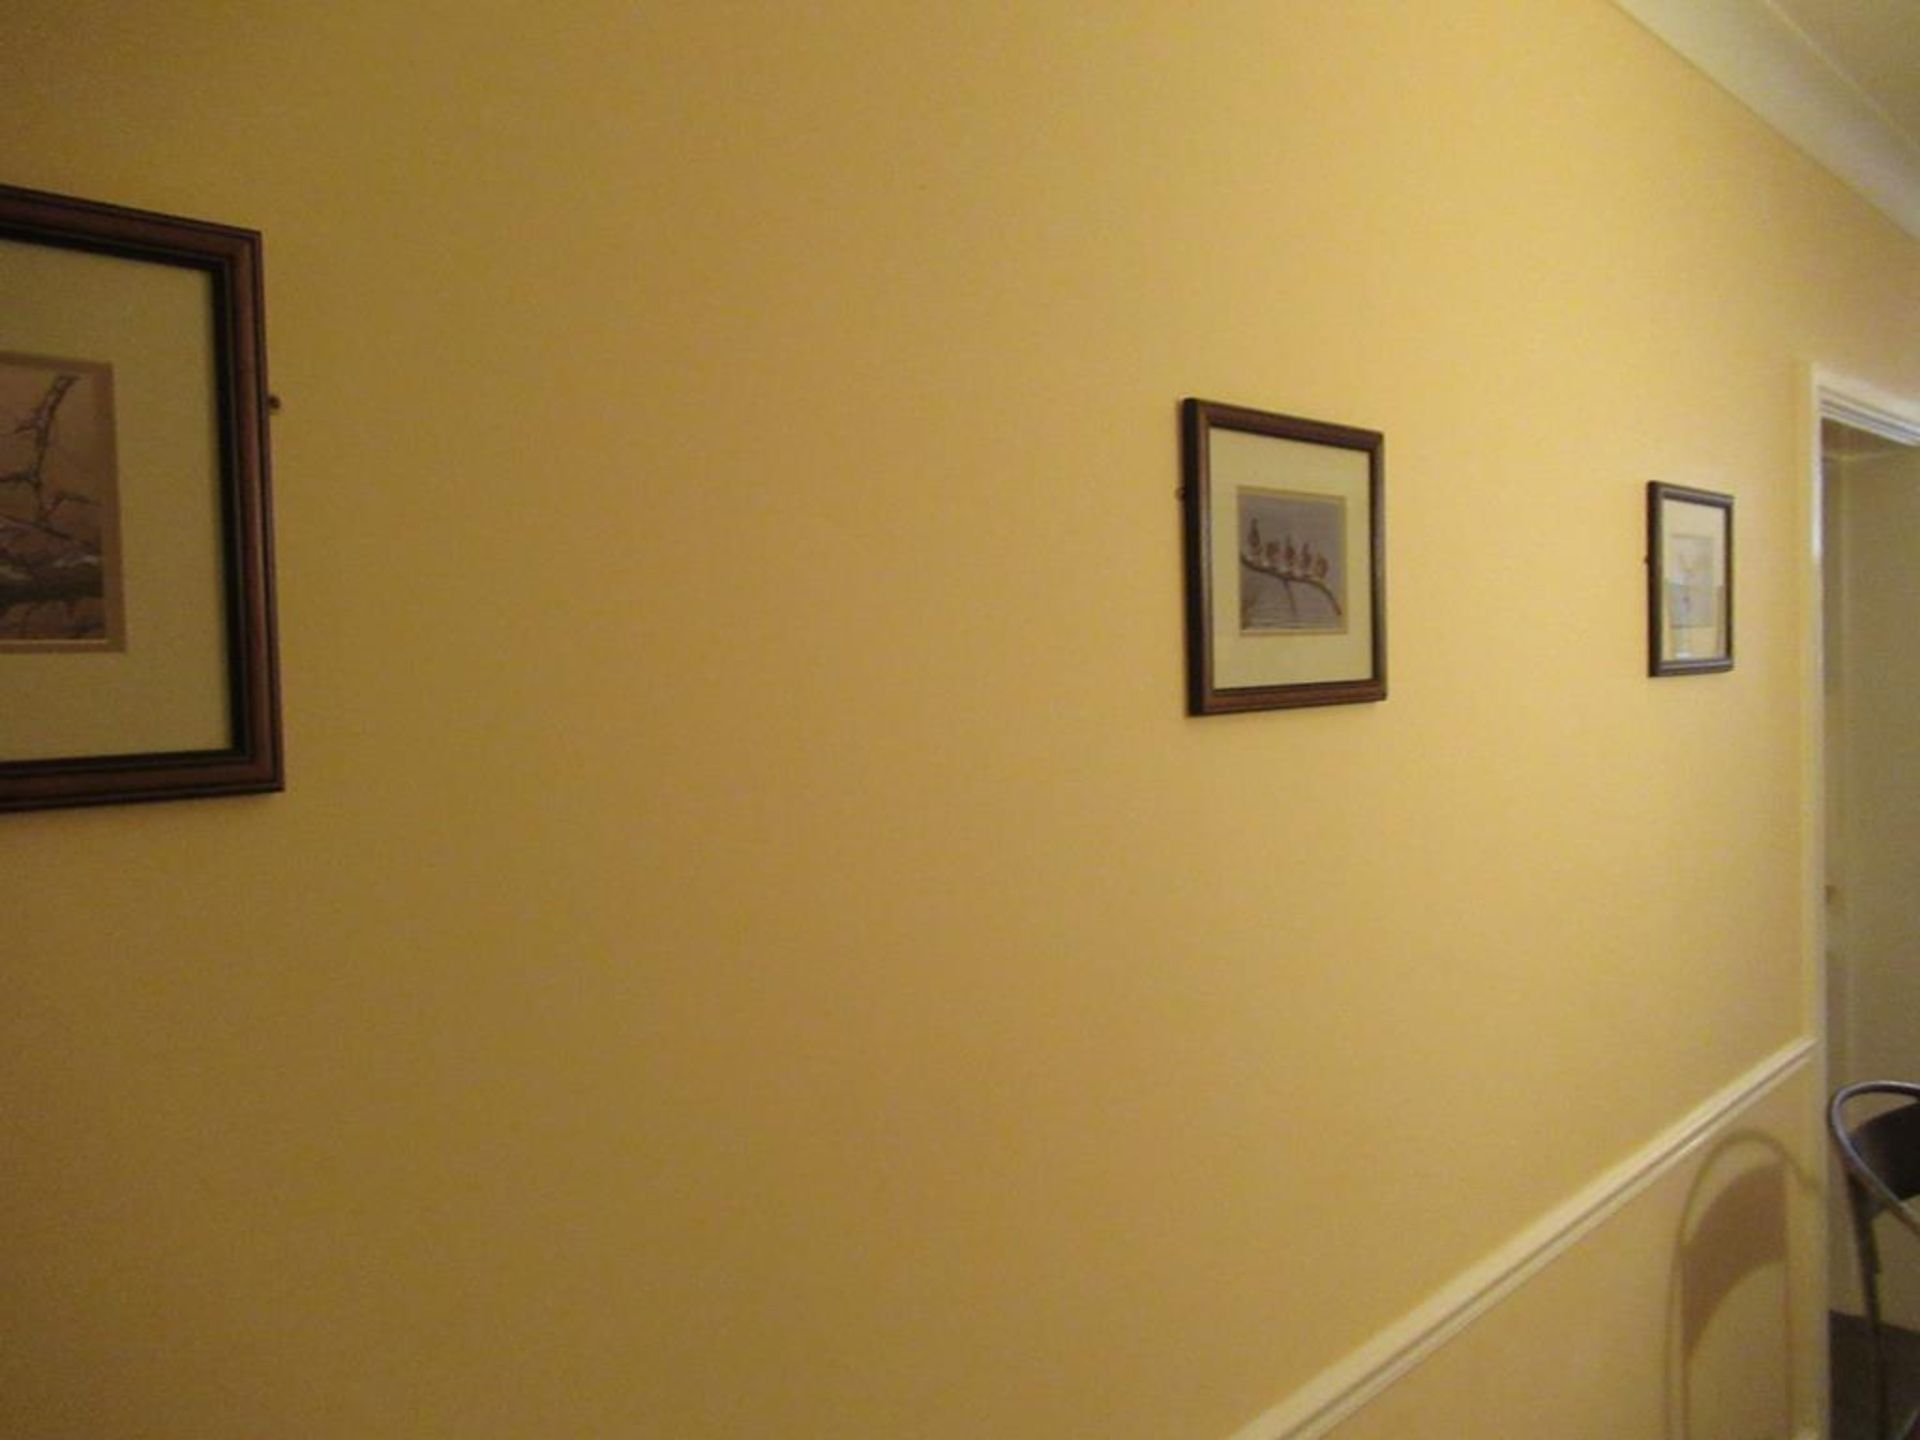 11 framed pictures of birds - Image 2 of 5